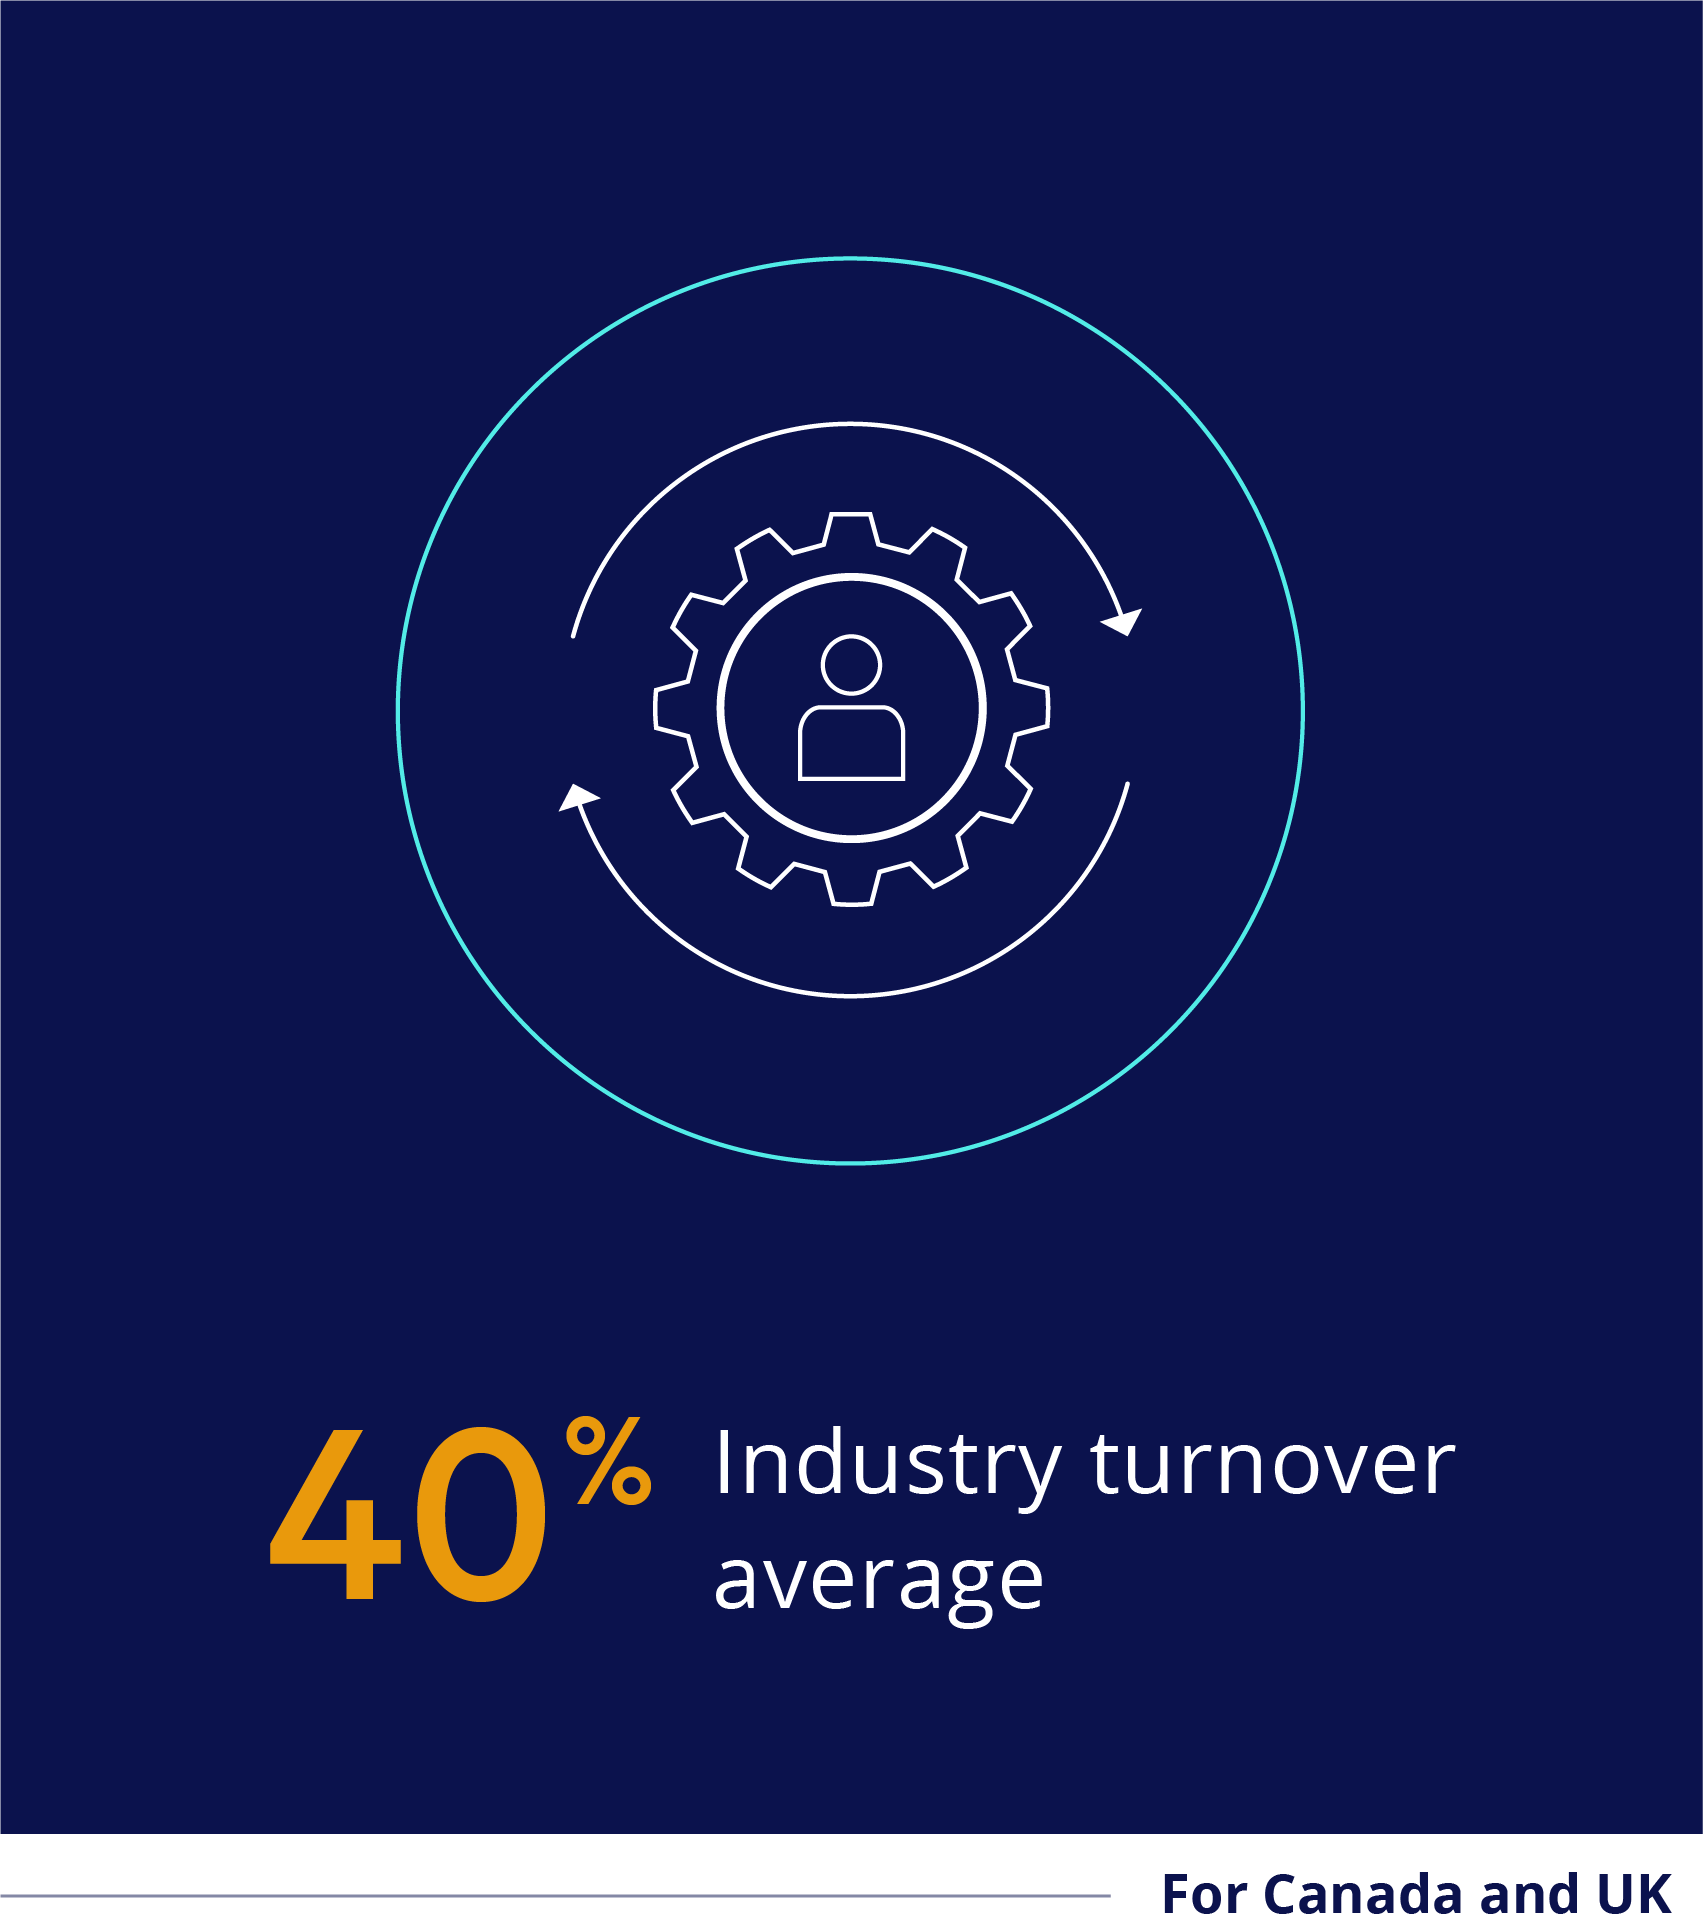 40% industry turnover average